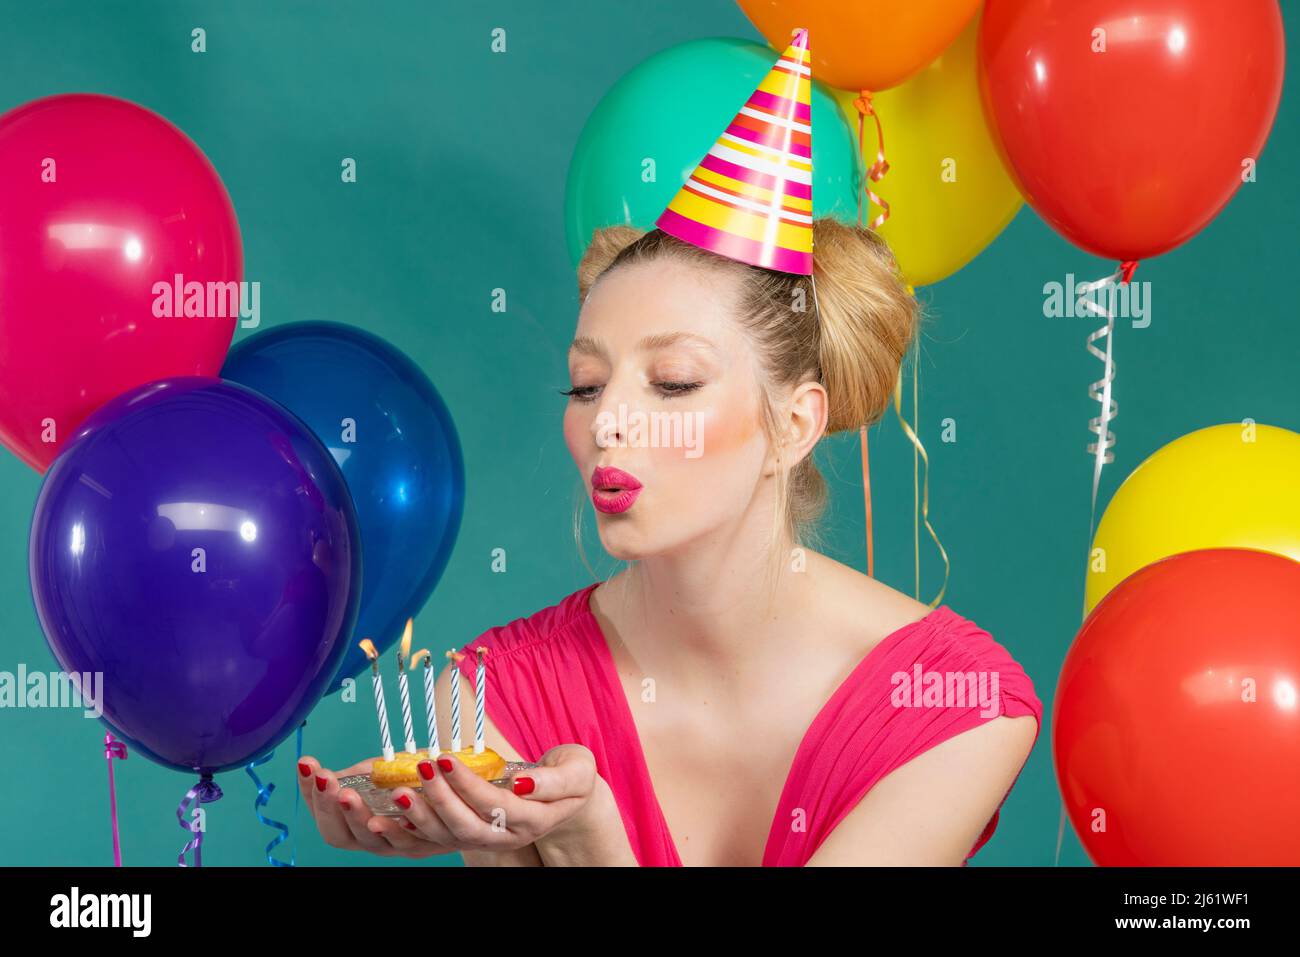 Young woman wearing party hat blowing candles on birthday cake against green background Stock Photo